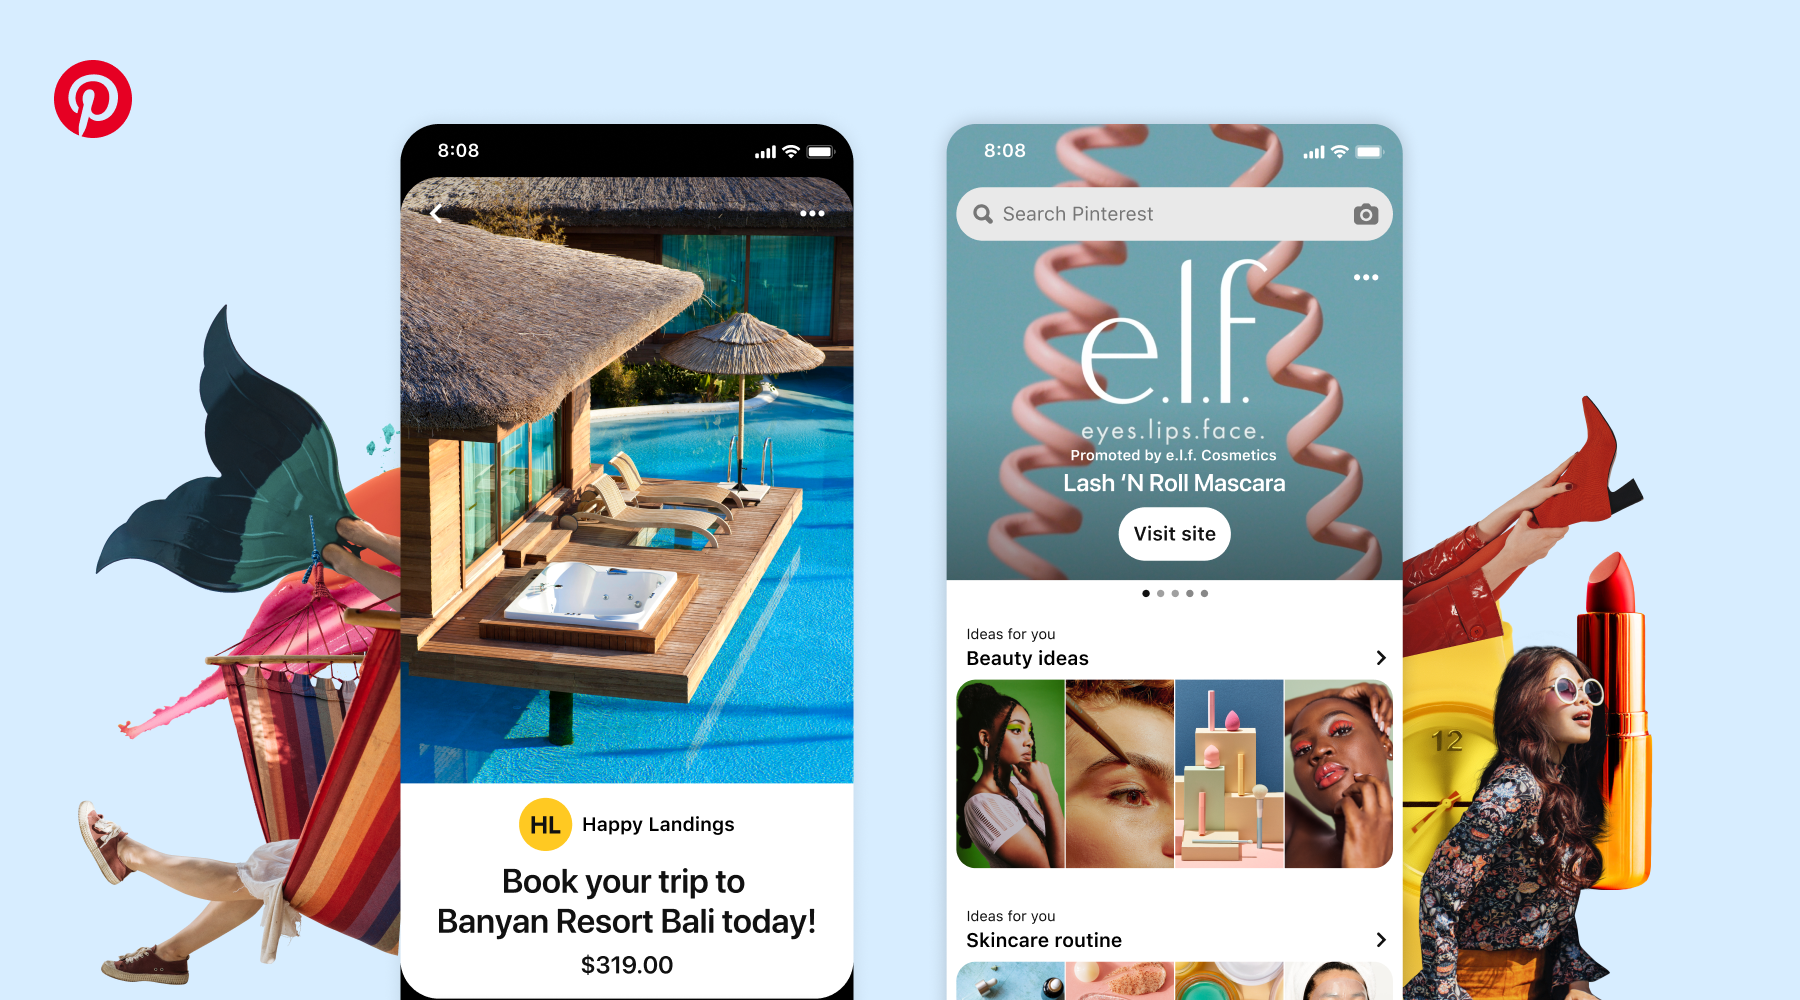 Pinterest is introducing Premiere Spotlight and Travel Catalogs as two new advertising solutions designed to help advertisers increase their campaign success on Pinterest.